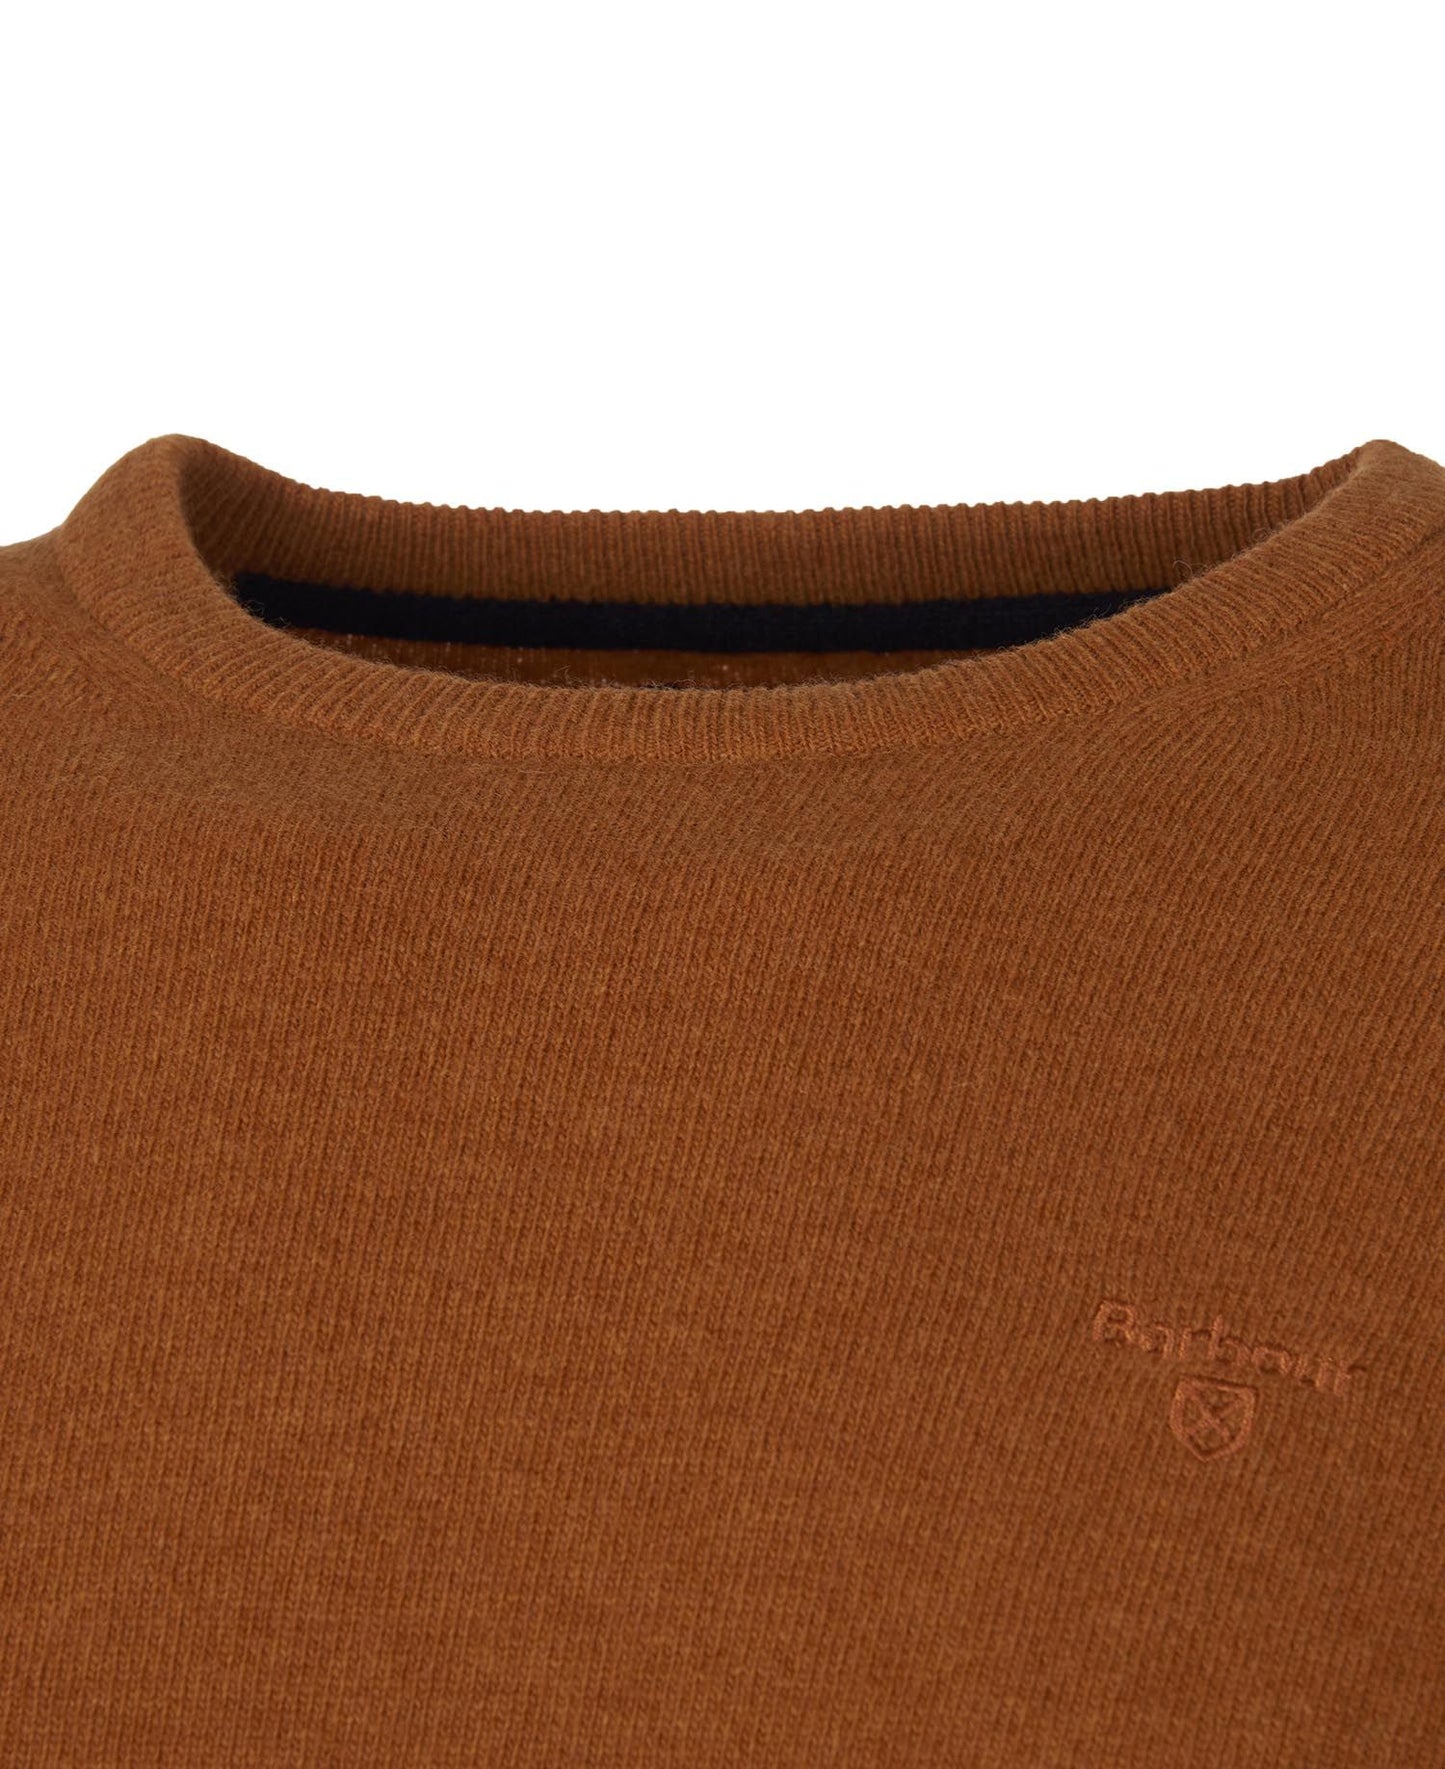 BARBOUR - MAGLIONE ESSENTIAL LAMBSWOOL CREW NECK SWEATER